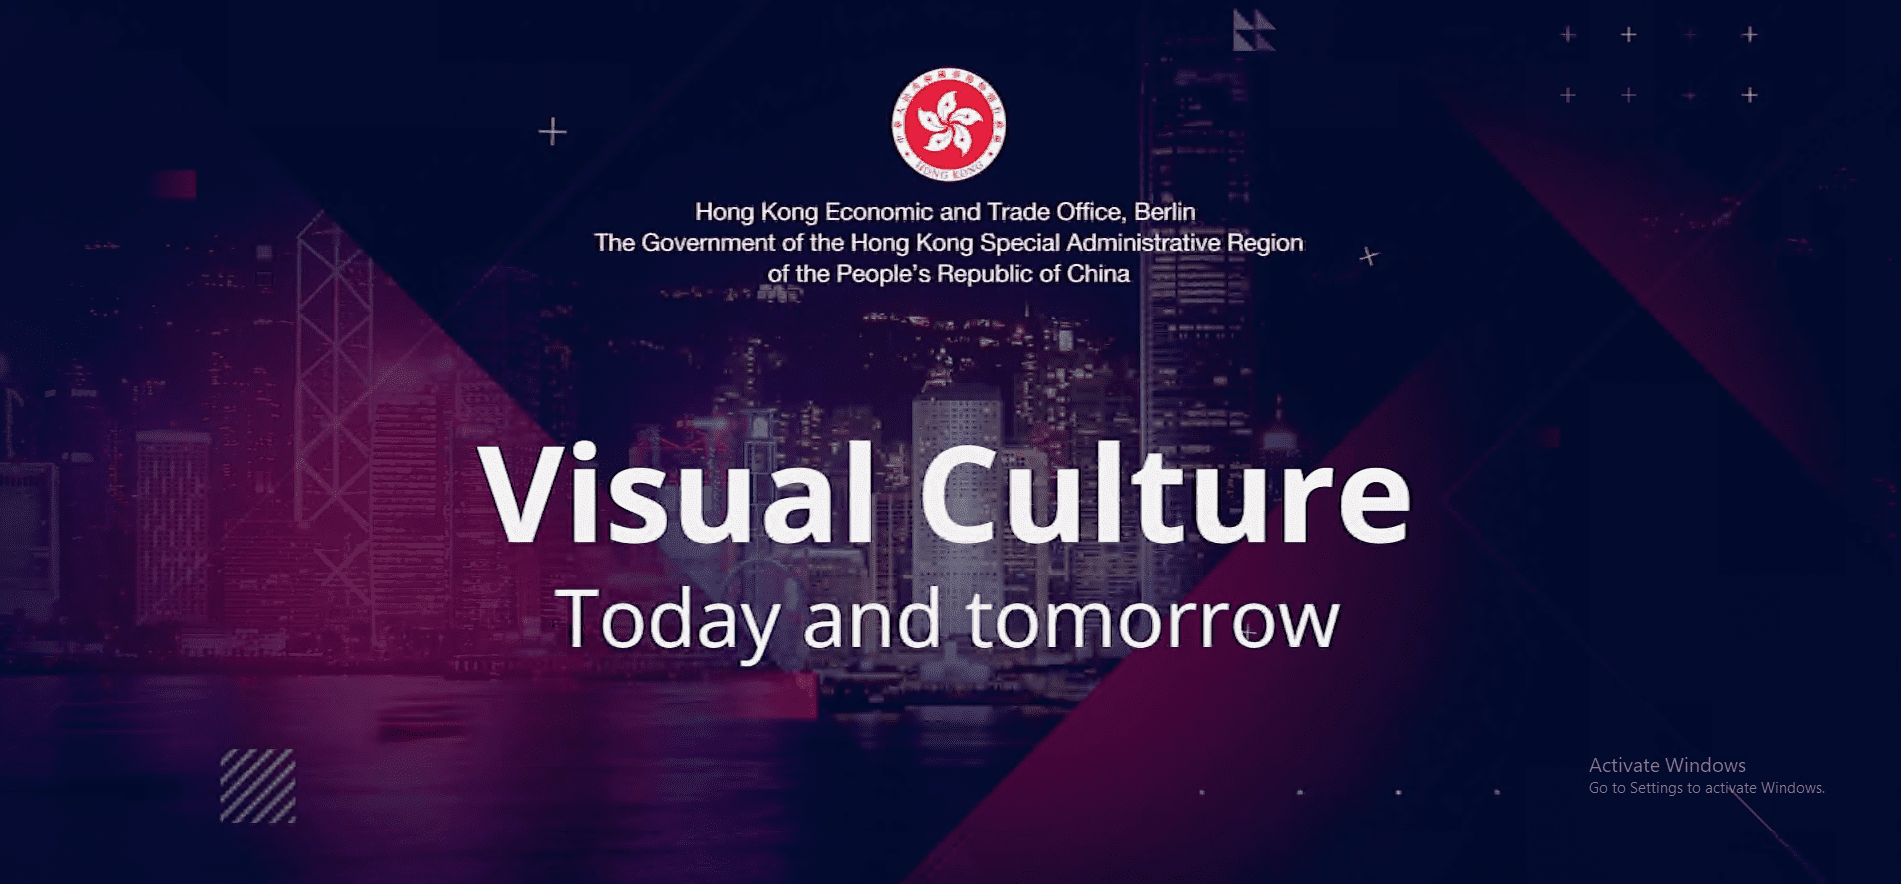 Webinar on Hong Kong’s visual culture in times of the pandemic